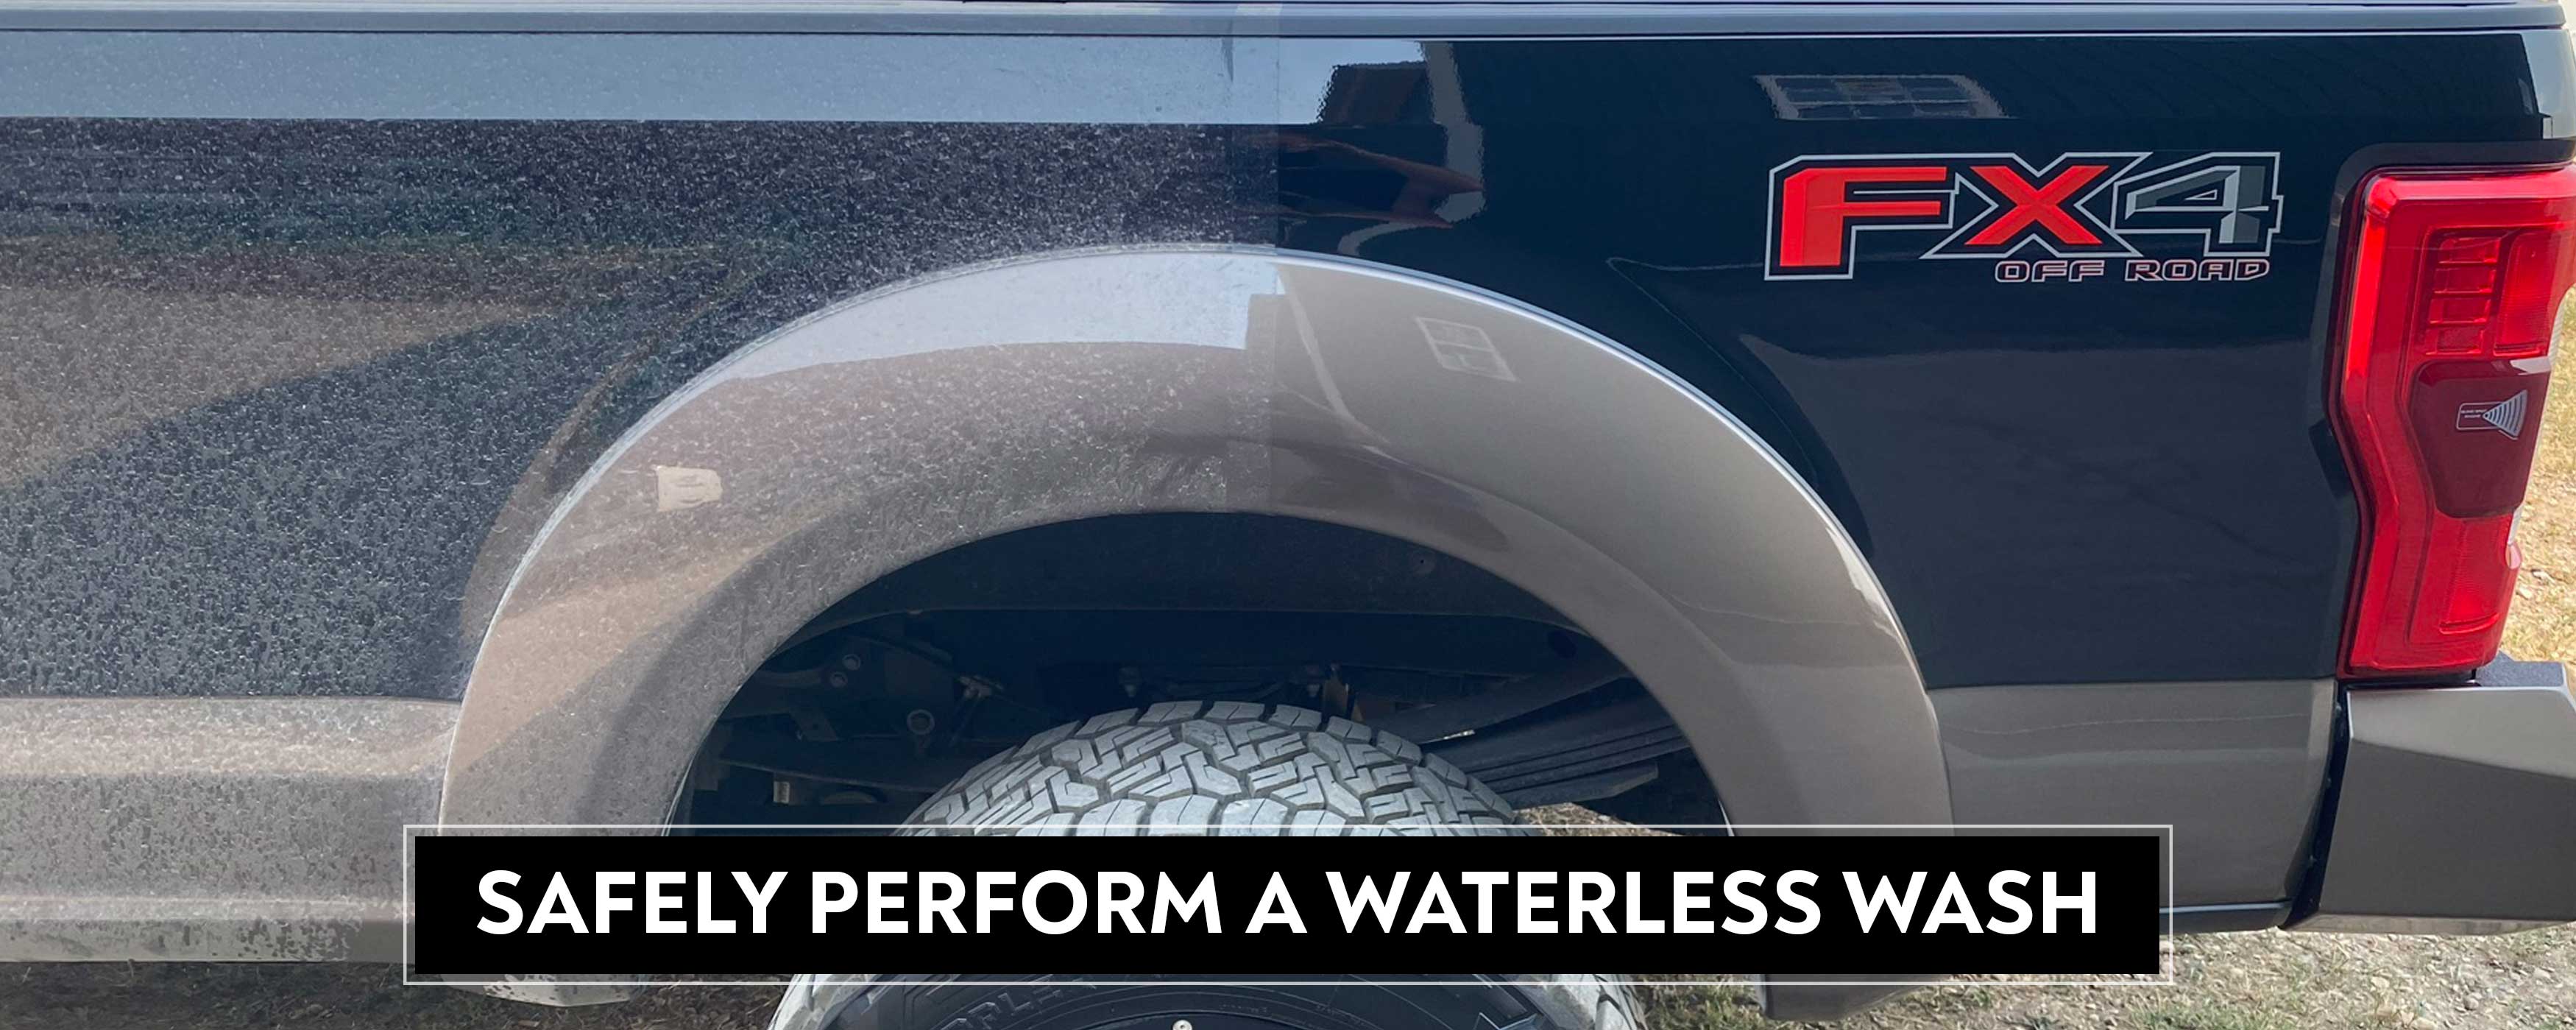 How To Safely Perform a Waterless Car Wash